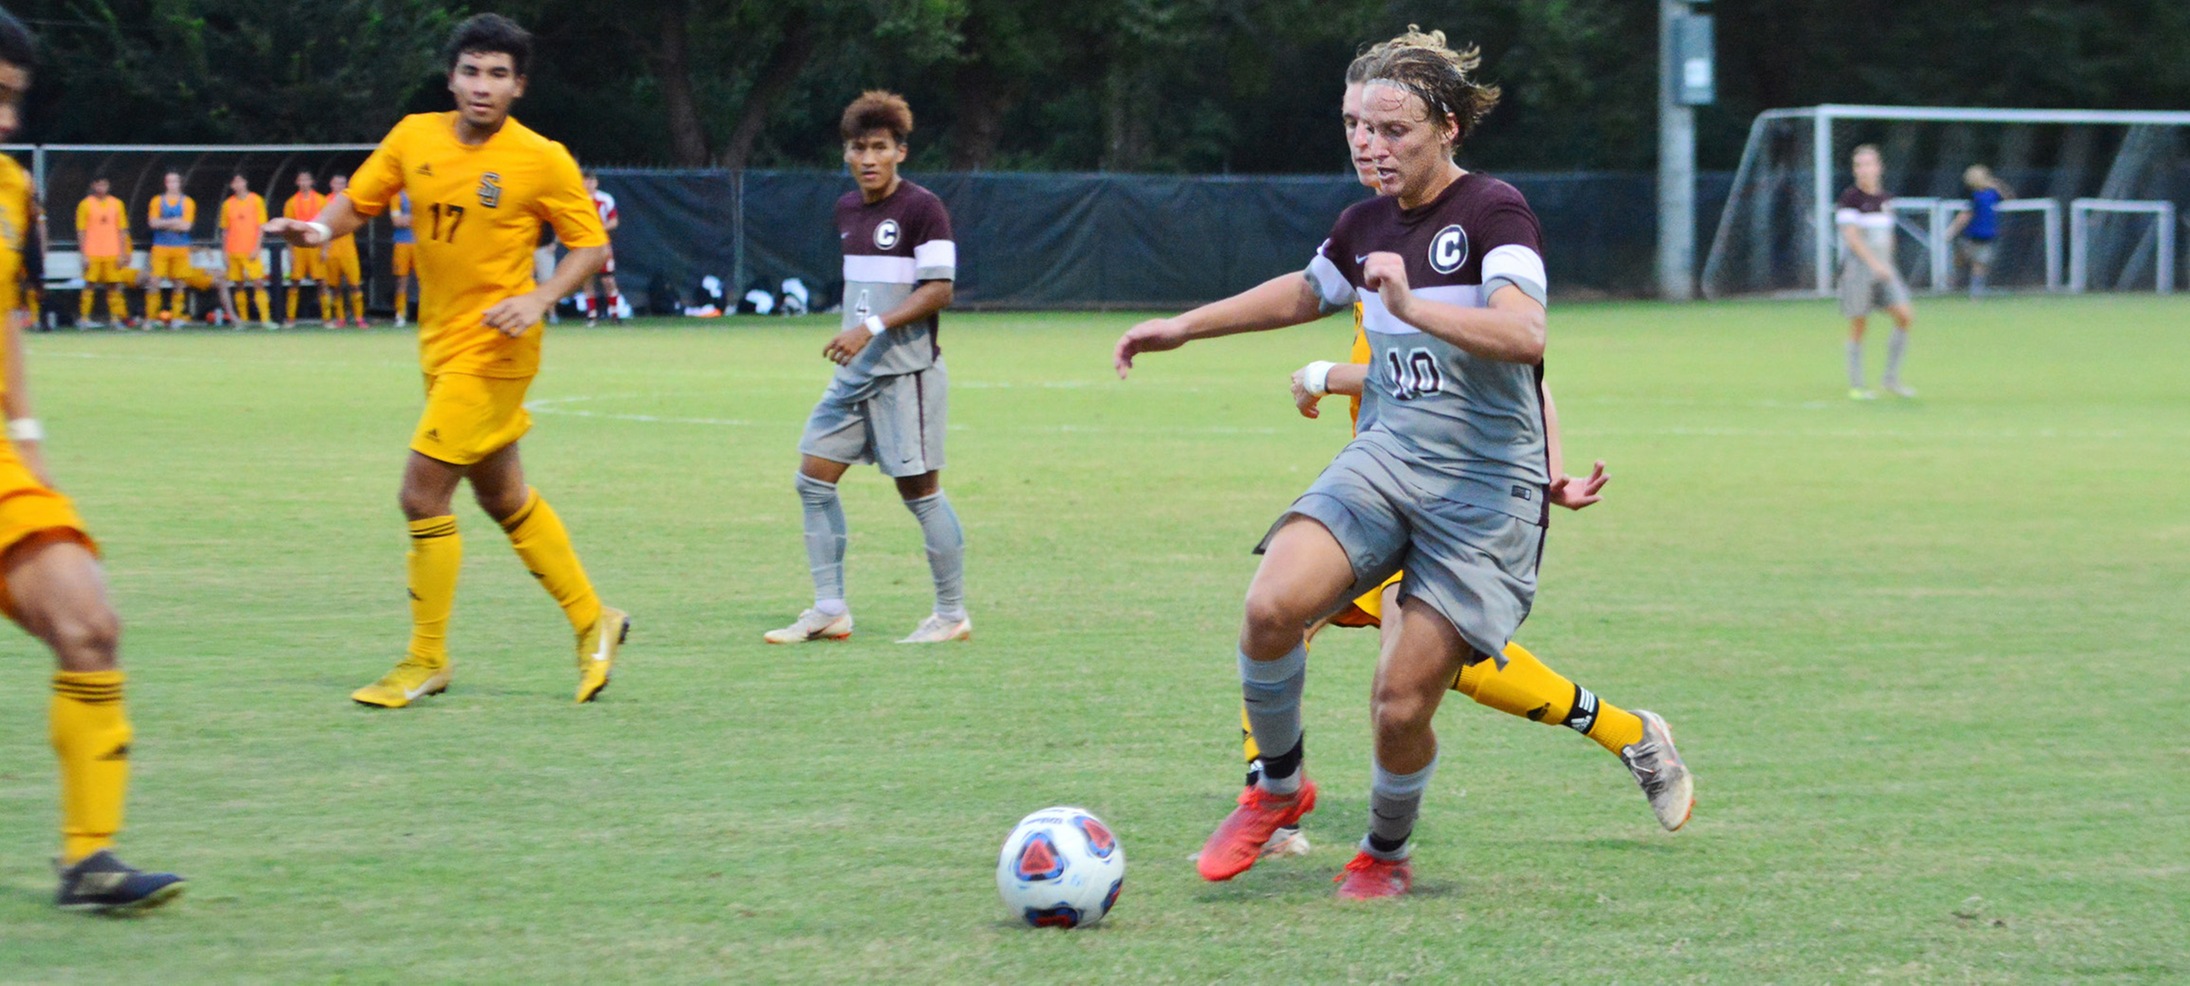 Men's Soccer Falls, 6-1, To Texas Lutheran In SCAC Play